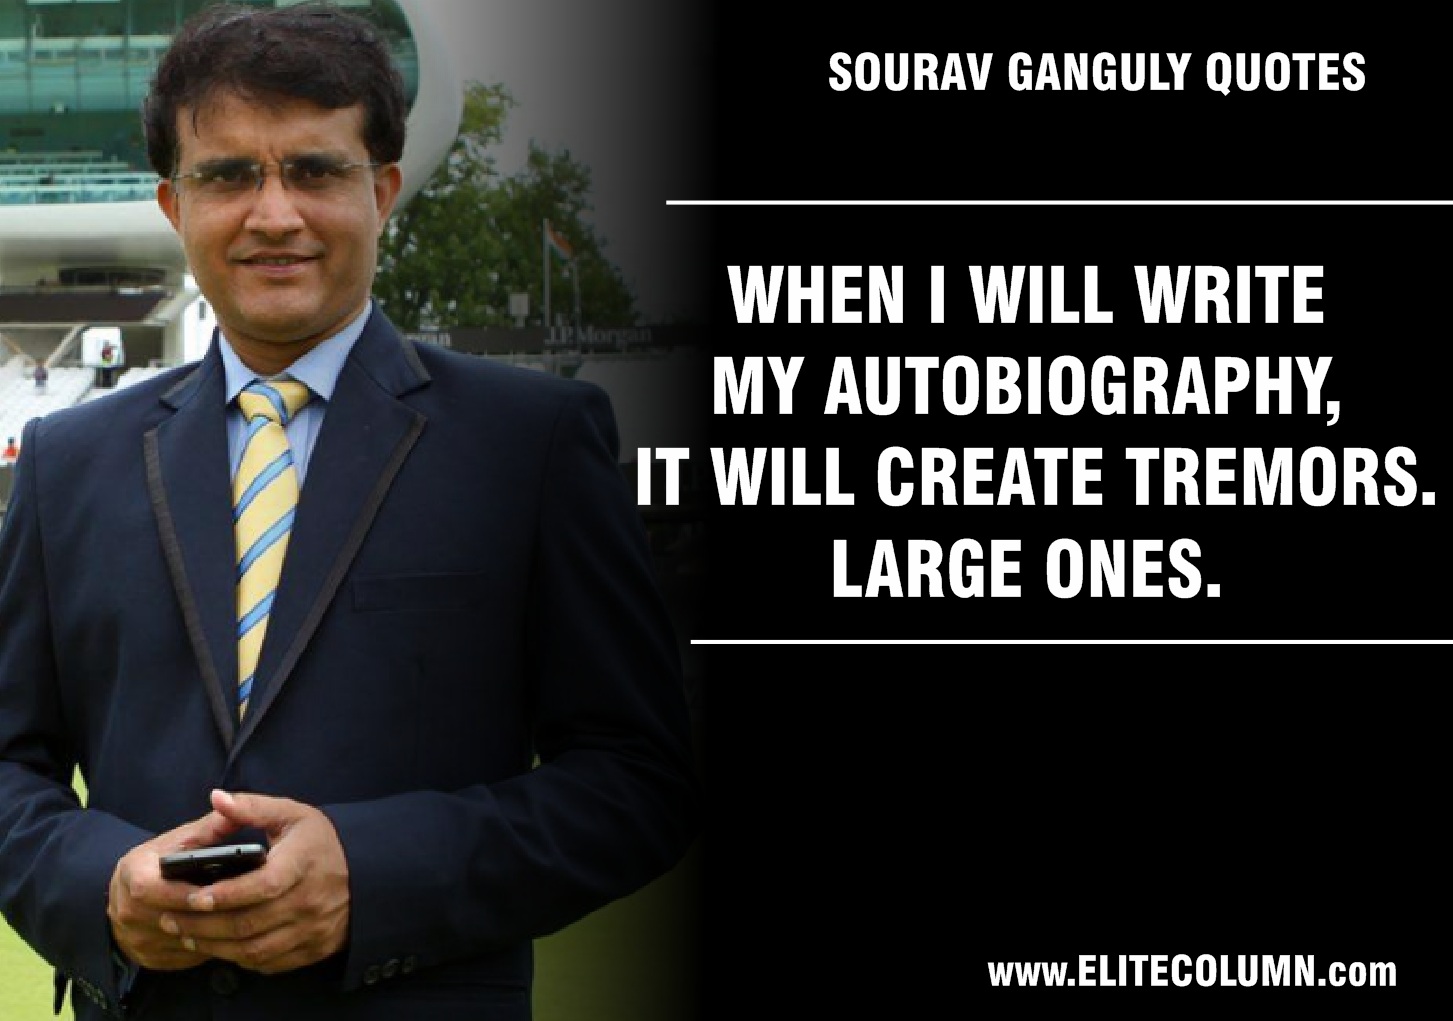 Sourav Ganguly Quotes (10)